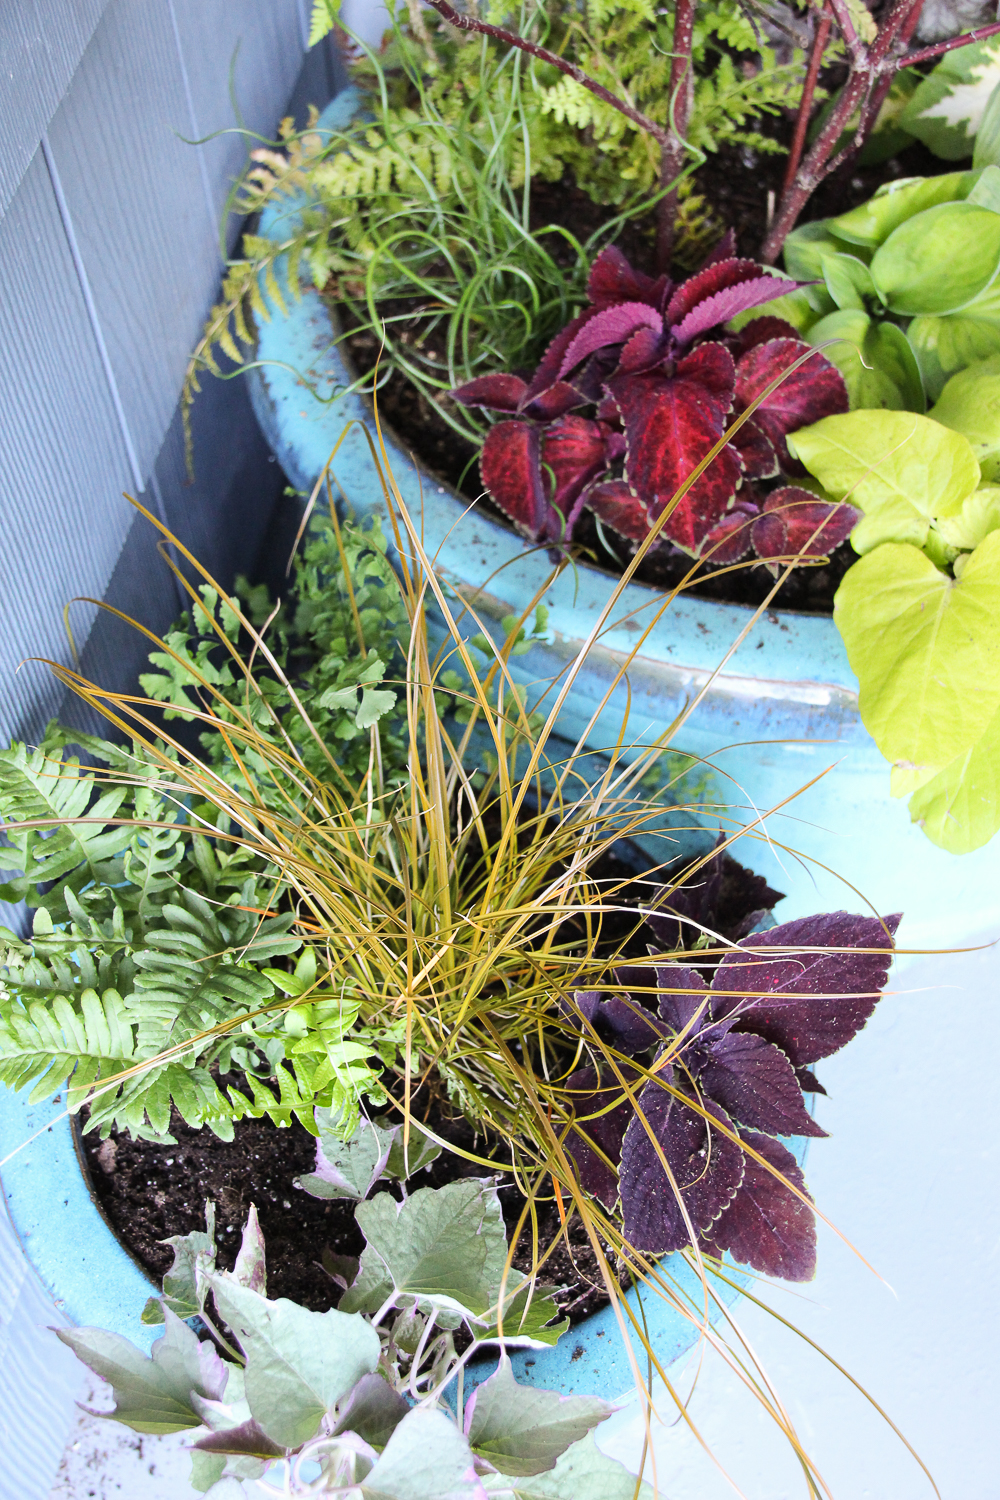 An aerial view of the multi coloured plants in the garden containers.